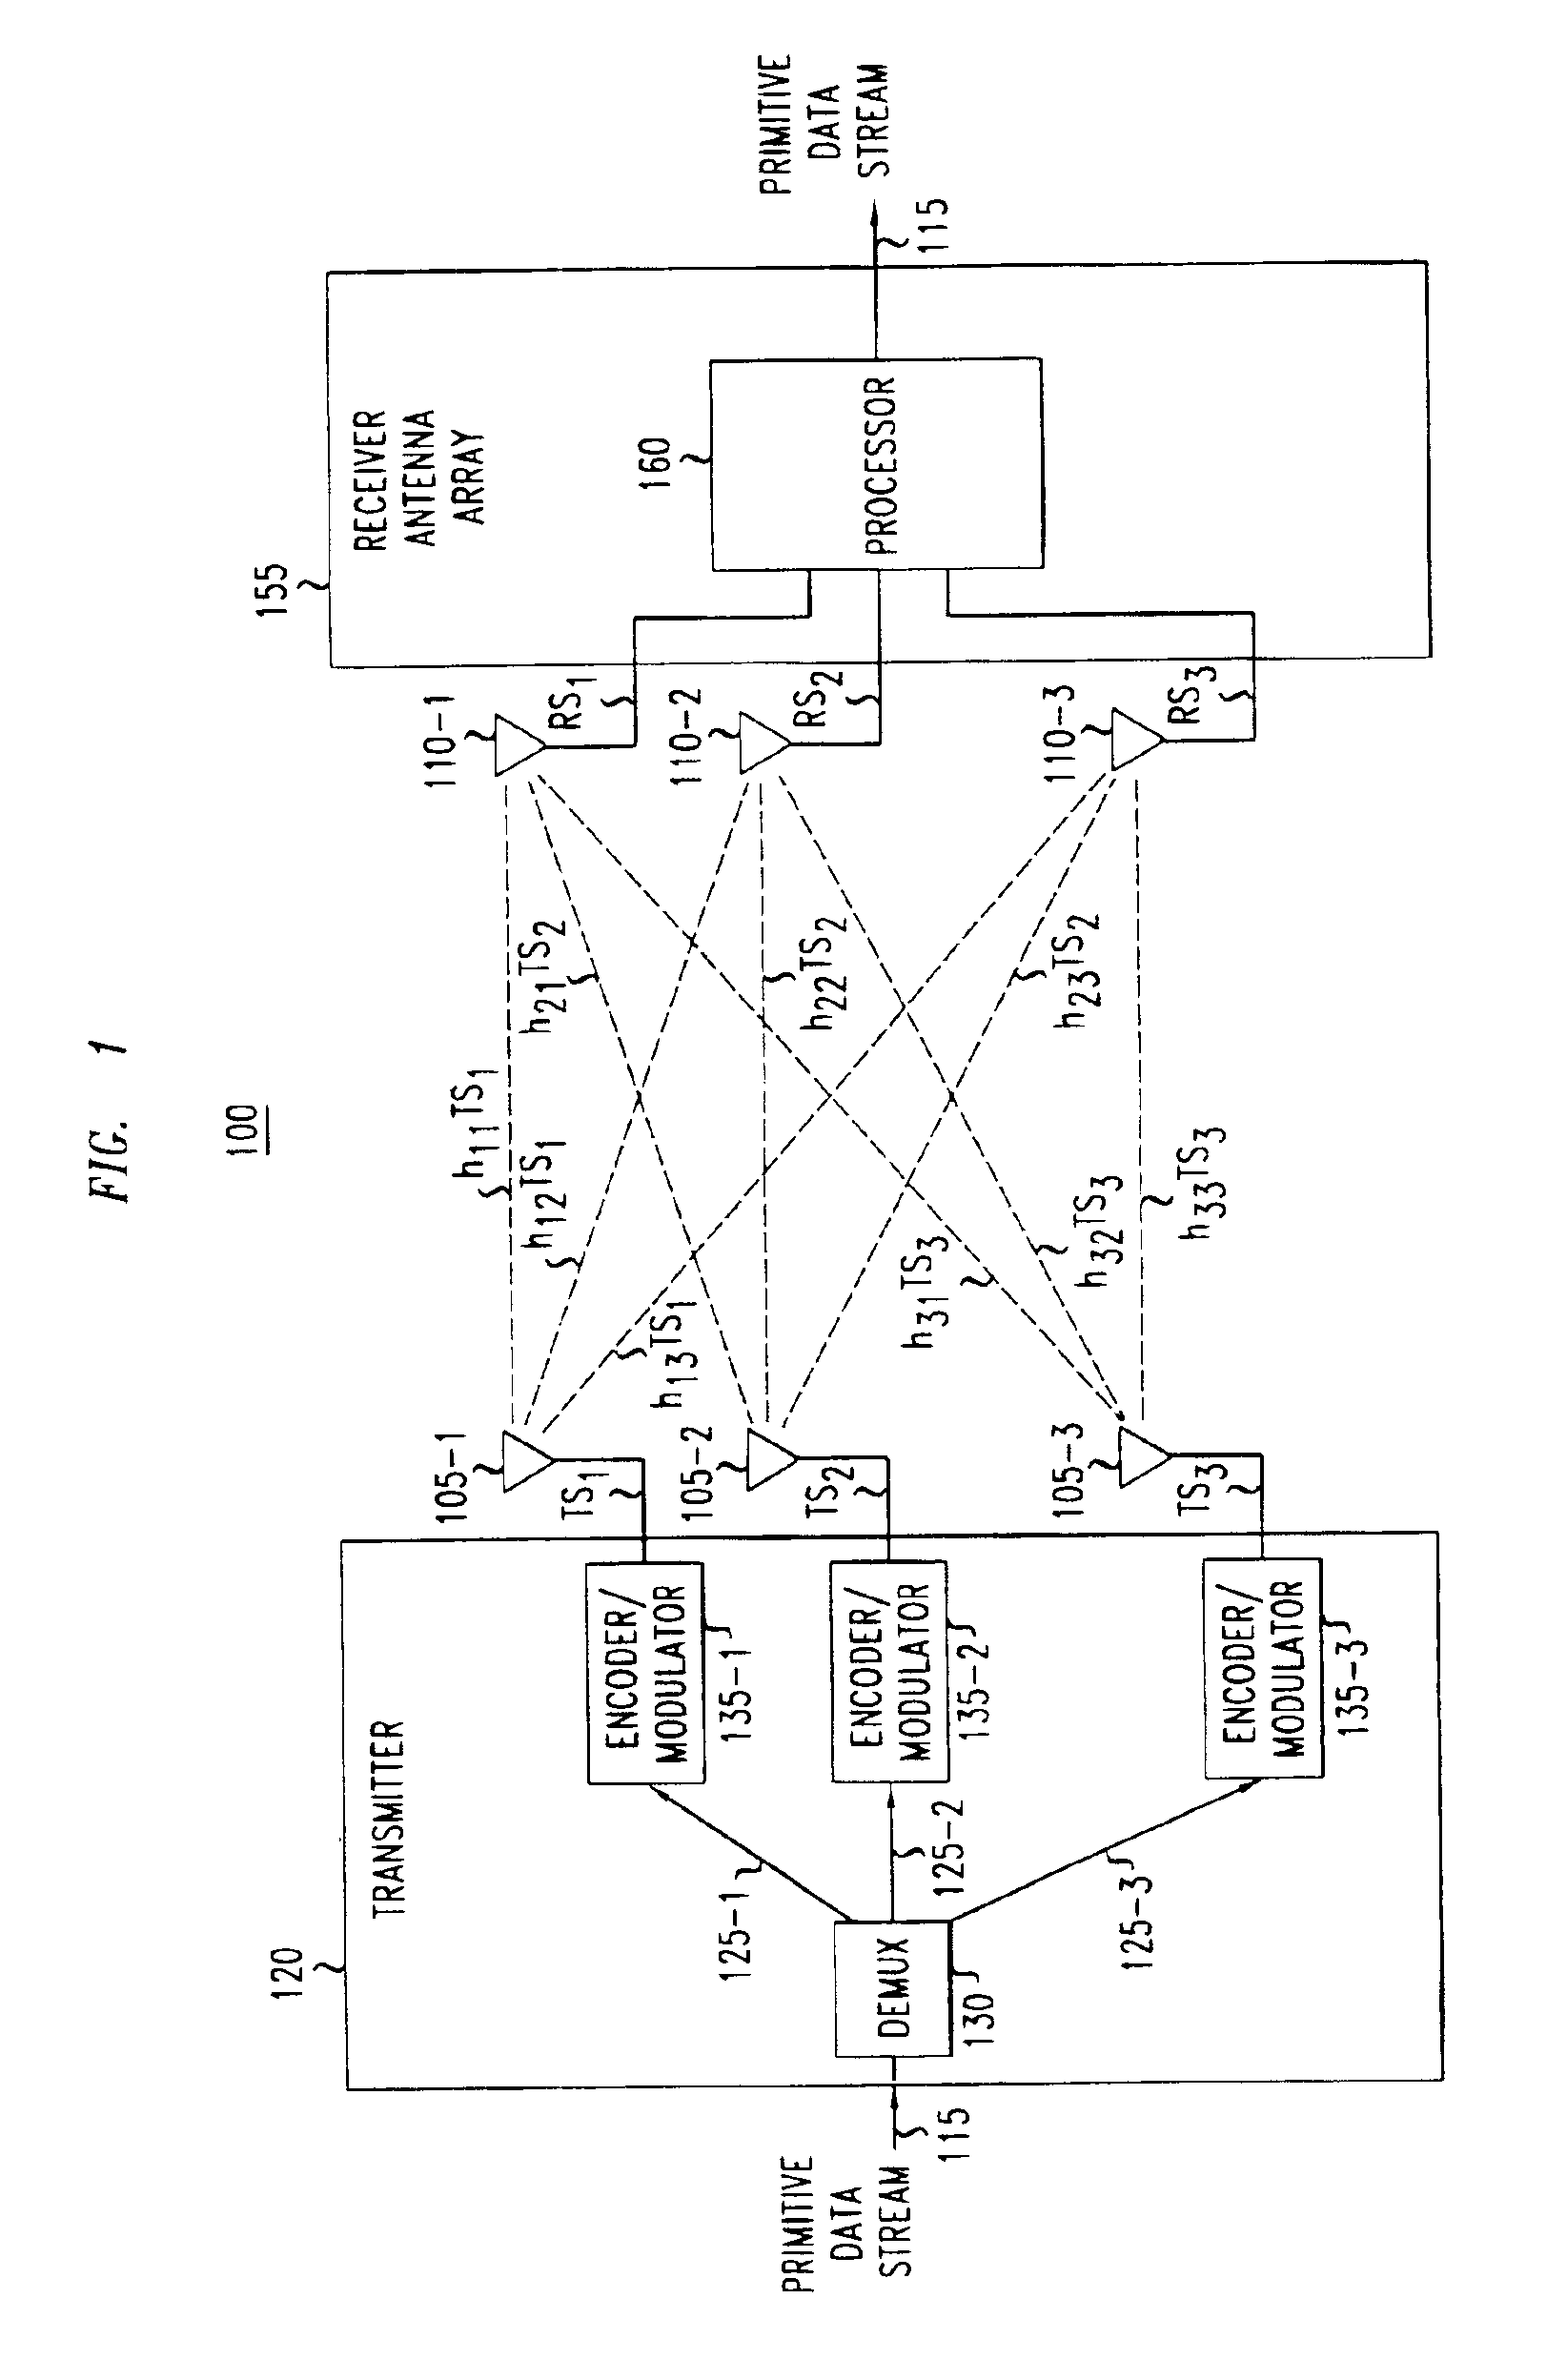 Determining channel characteristics in a wireless communication system that uses multi-element antenna